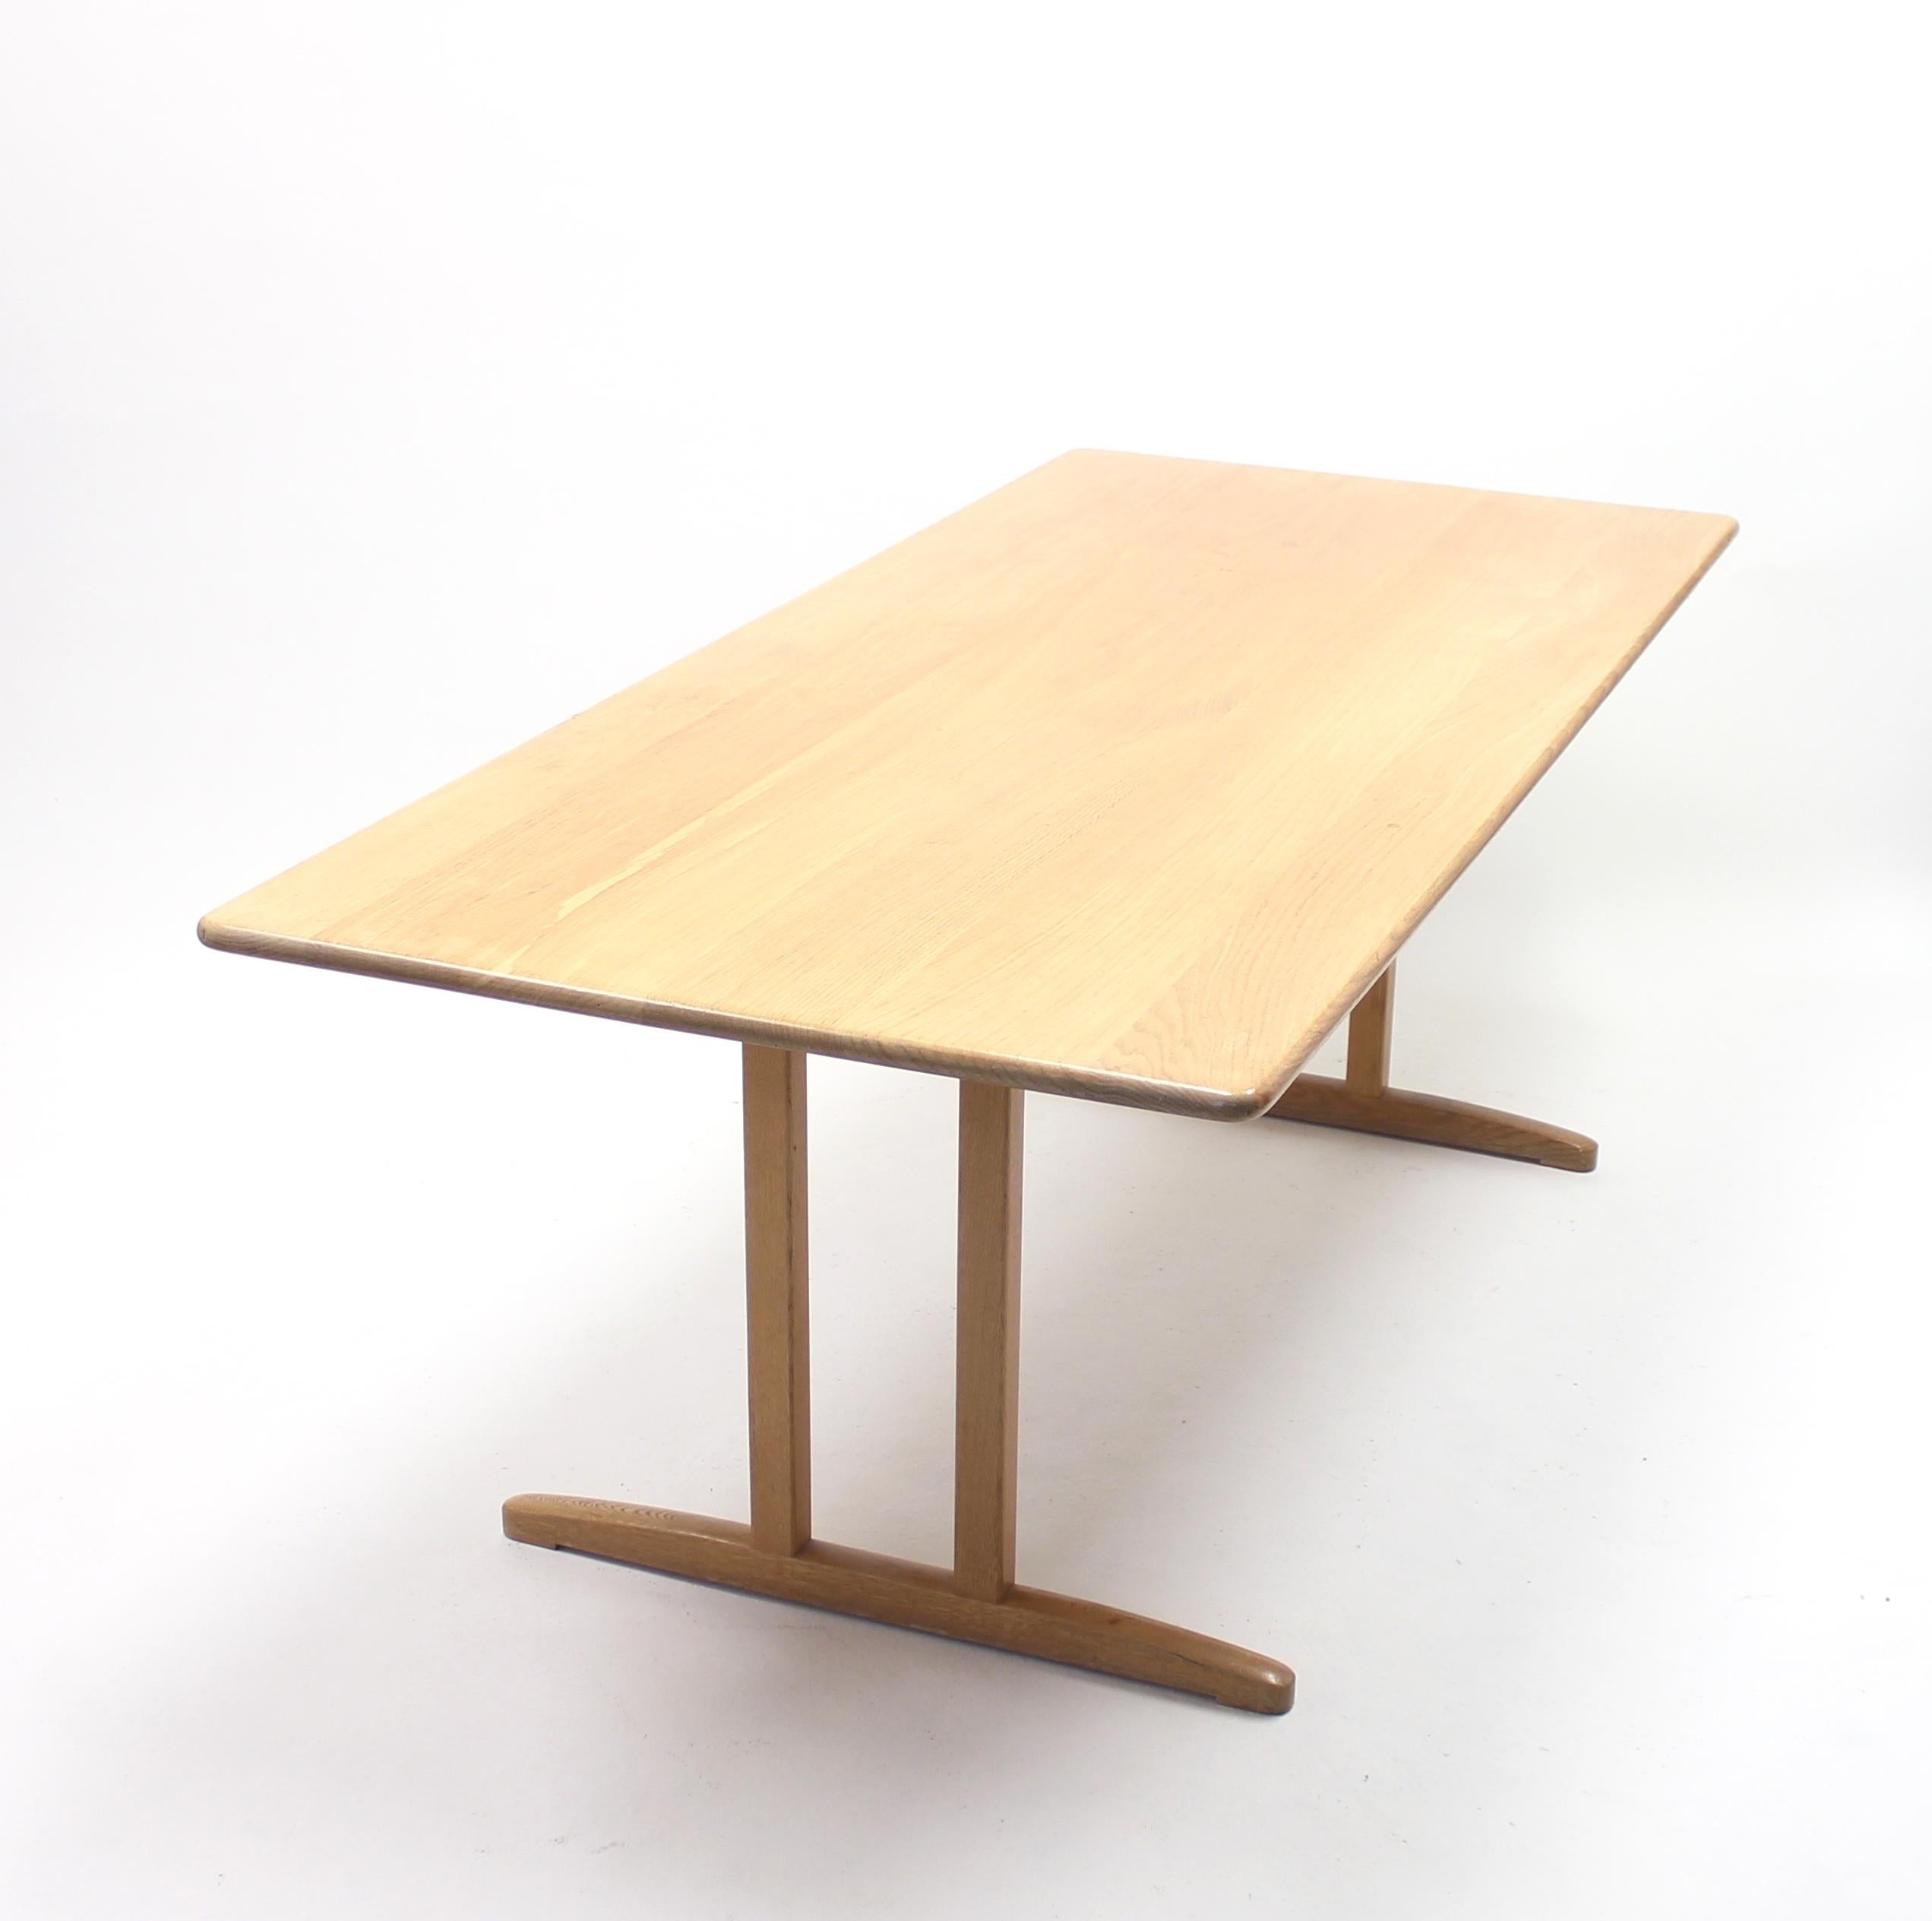 Børge Mogensen shaker style oak dining table, model Øresund 195, produced by Swedish manufacturer Karl Andersson & söner. Good vintage condition with light signs of ware consistent with age and use.